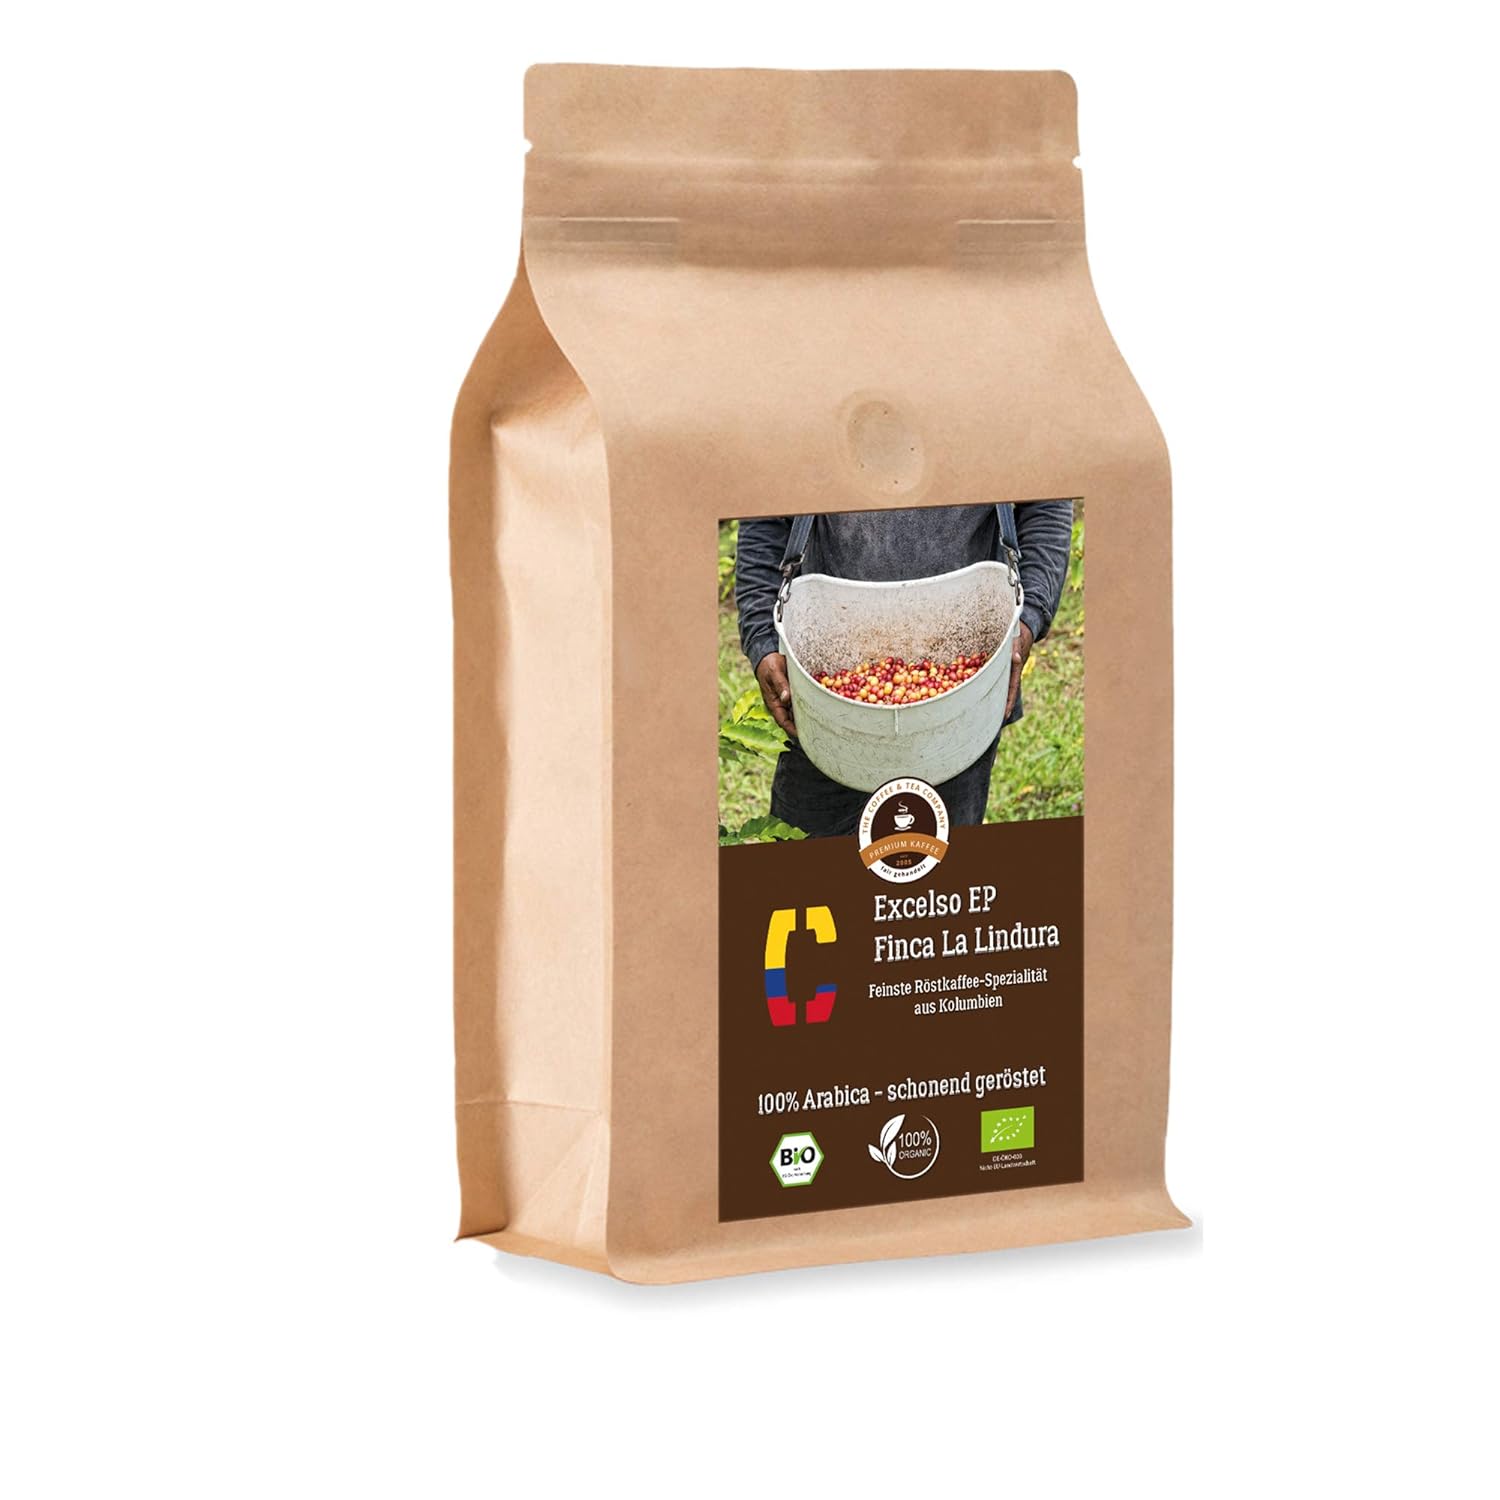 Coffee Globetrotter - Bio Colombia Excelso EP Finca la Lindura - 1000 g Whole Bean - for Fully Automatic Coffee Grinder, Hand Mill - Top Coffee - Roasted Coffee from Organic Cultivation